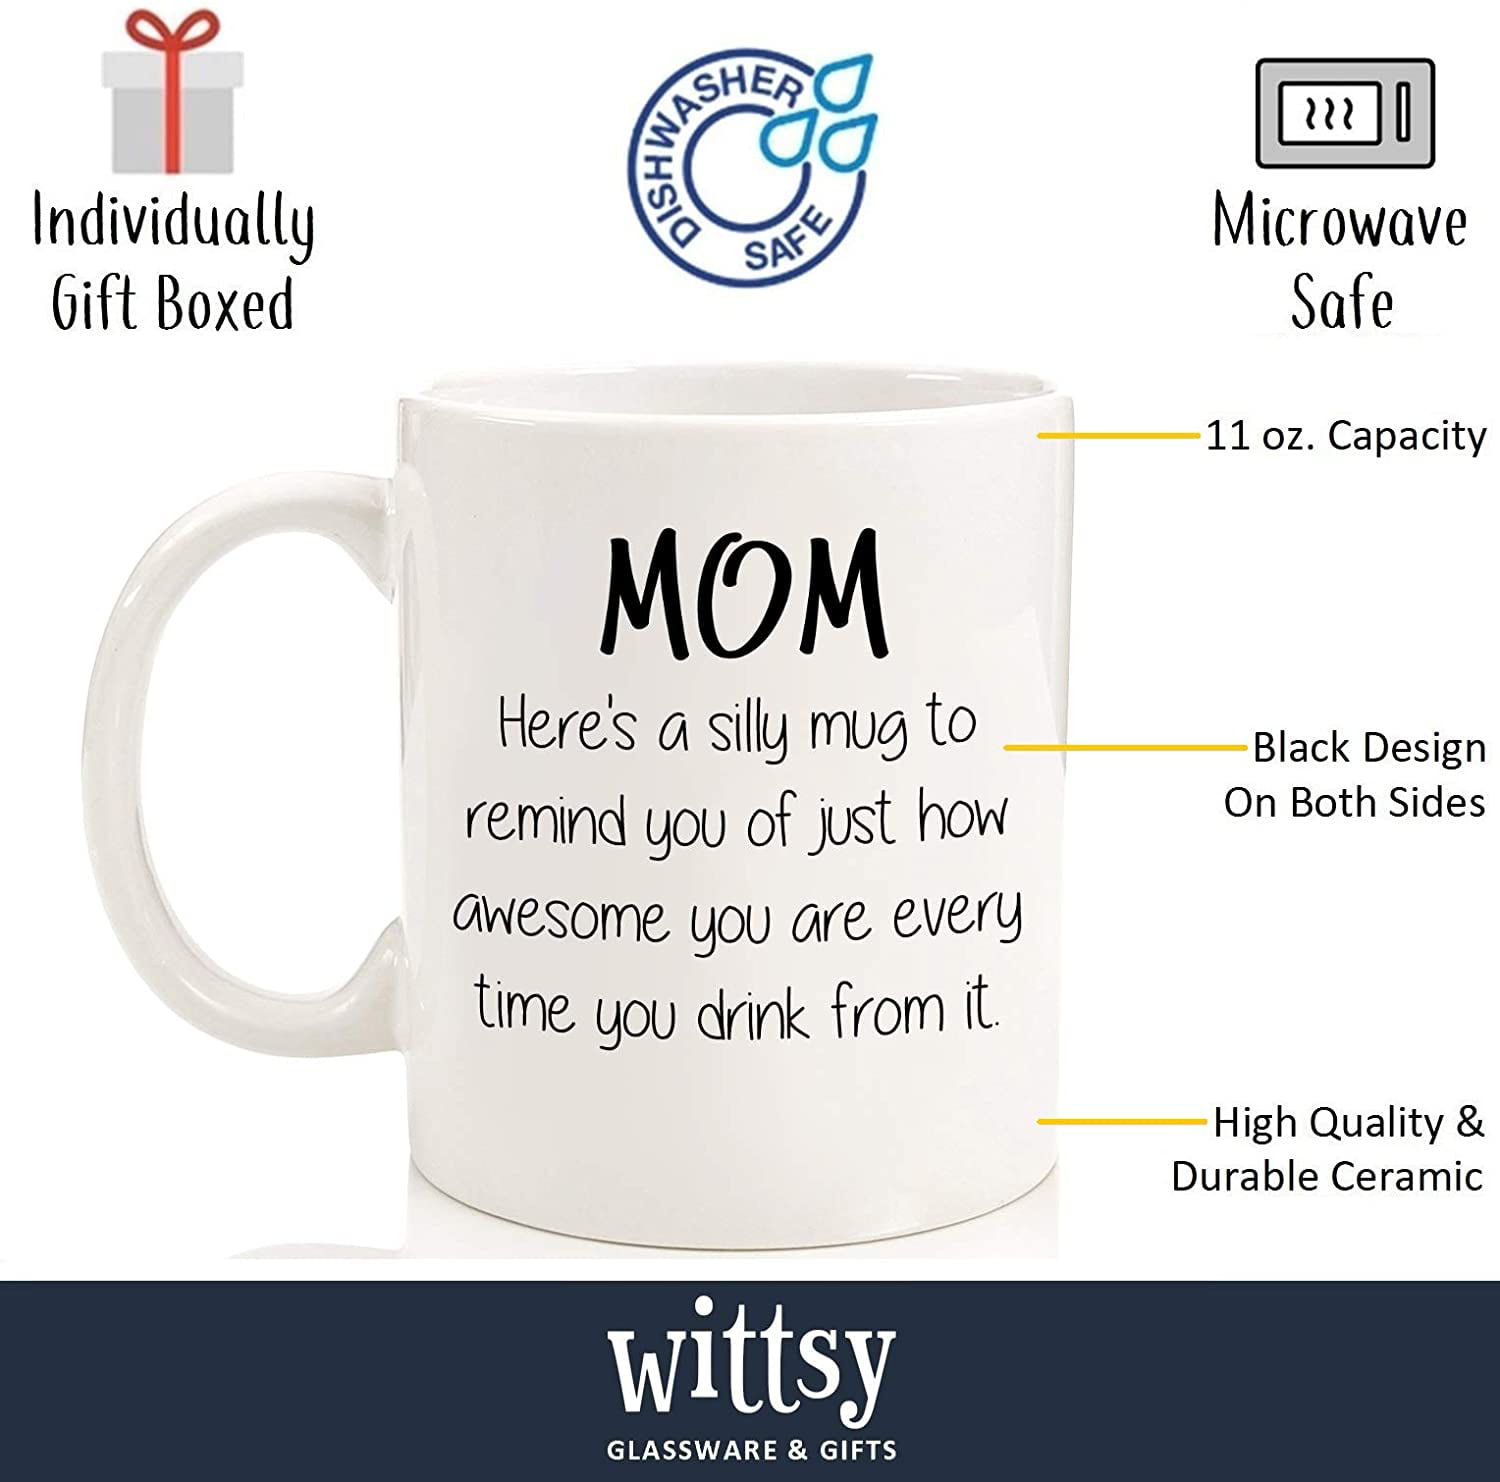 Maustic Mom Coffee Mug, Mom Nutrition Facts Funny Coffee Mug, Mothers Day  Gifts for Mom from Daughte…See more Maustic Mom Coffee Mug, Mom Nutrition